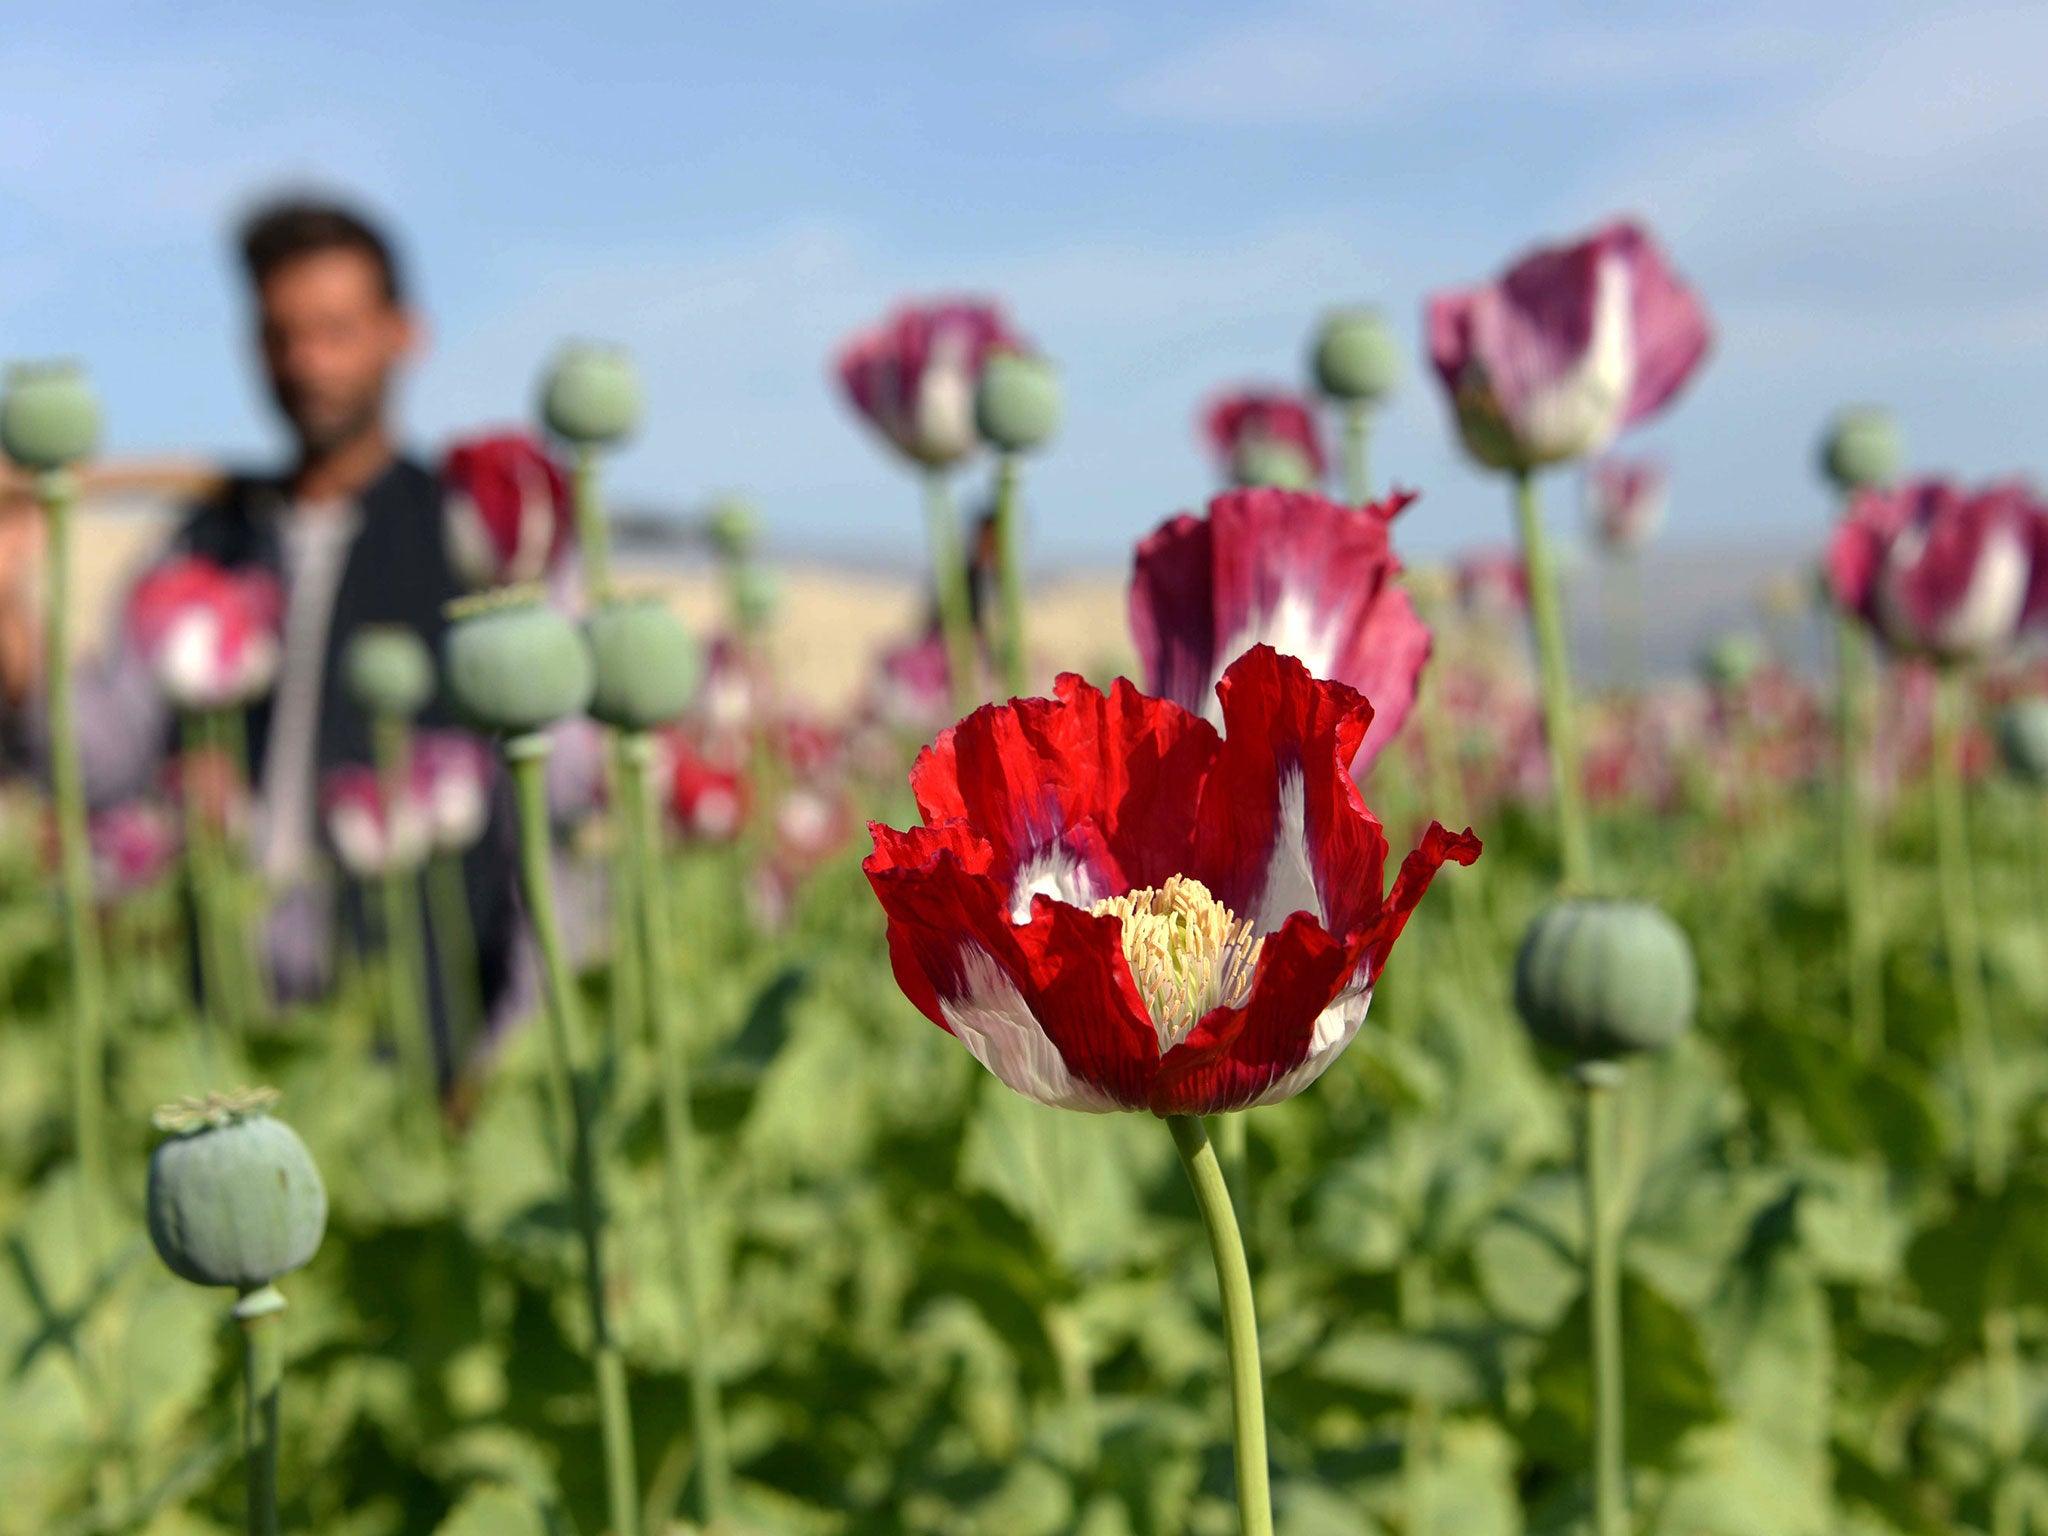 The opium poppy has been the source of the most powerful painkiller known to science for thousands of years